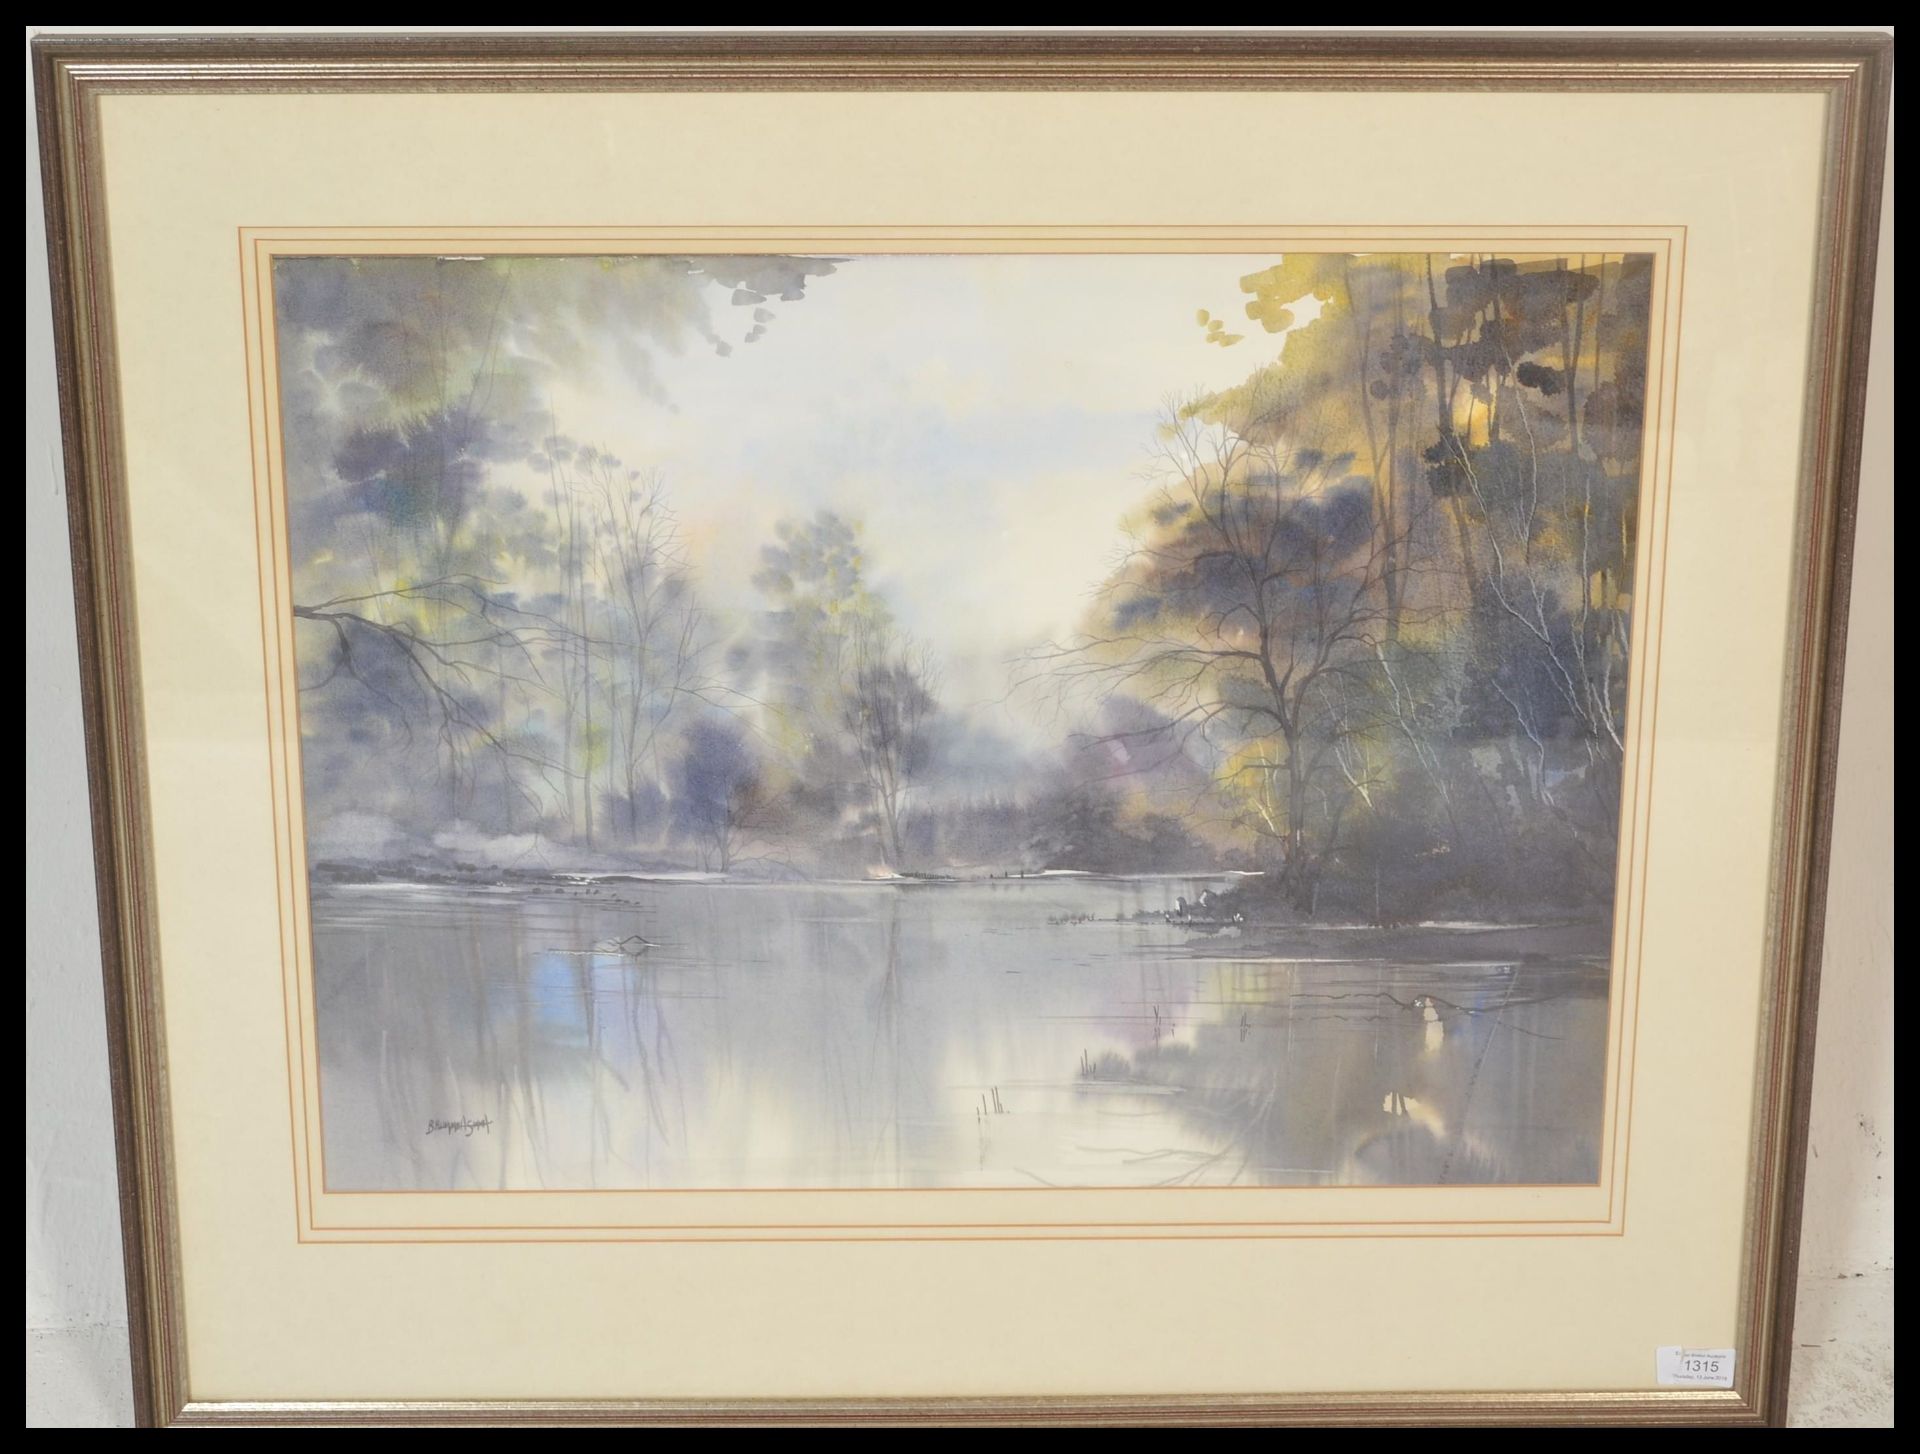 Tony Brummel-Smith (1949-) A 20th century water colour painting entitled ' Across the Lake ' dated